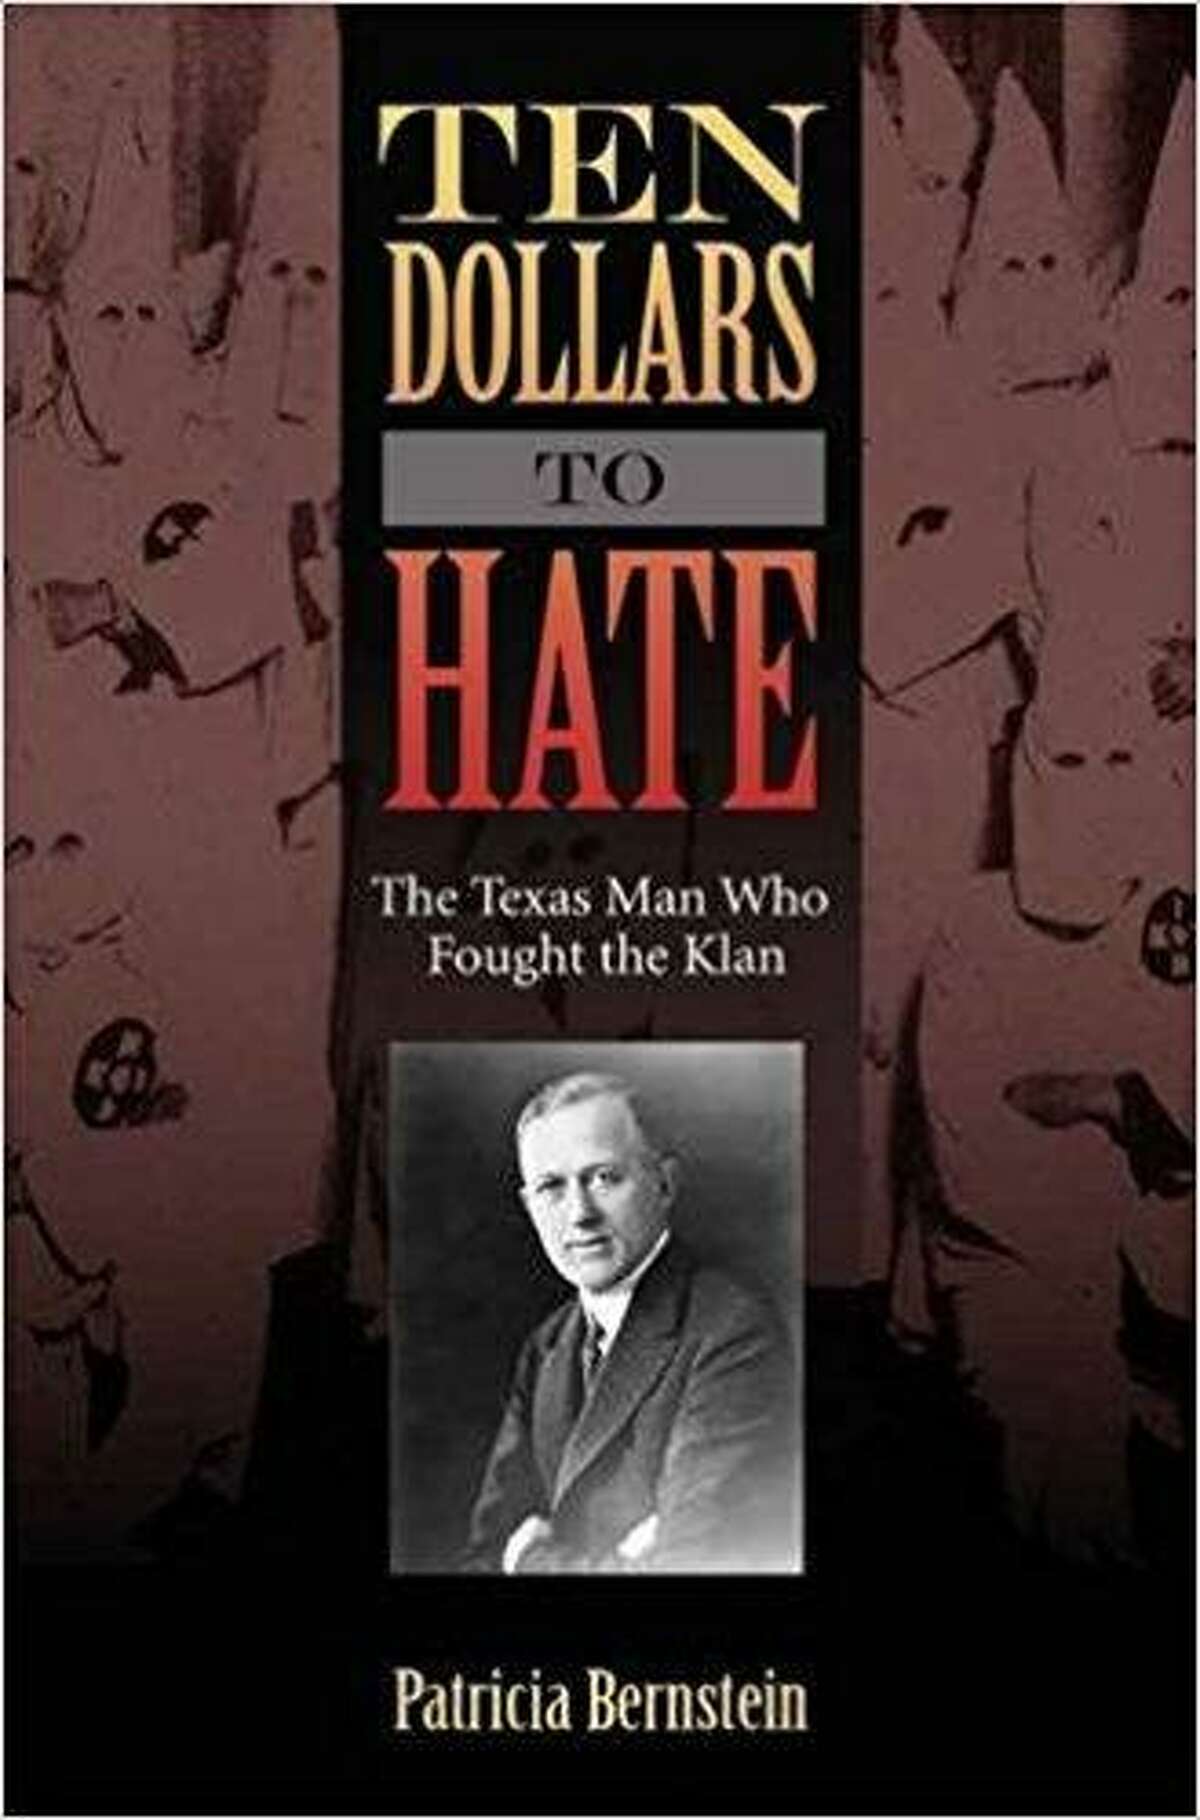 “Ten Dollars to Hate: The Texas Man Who Fought the Klan” by Patricia Bernstein